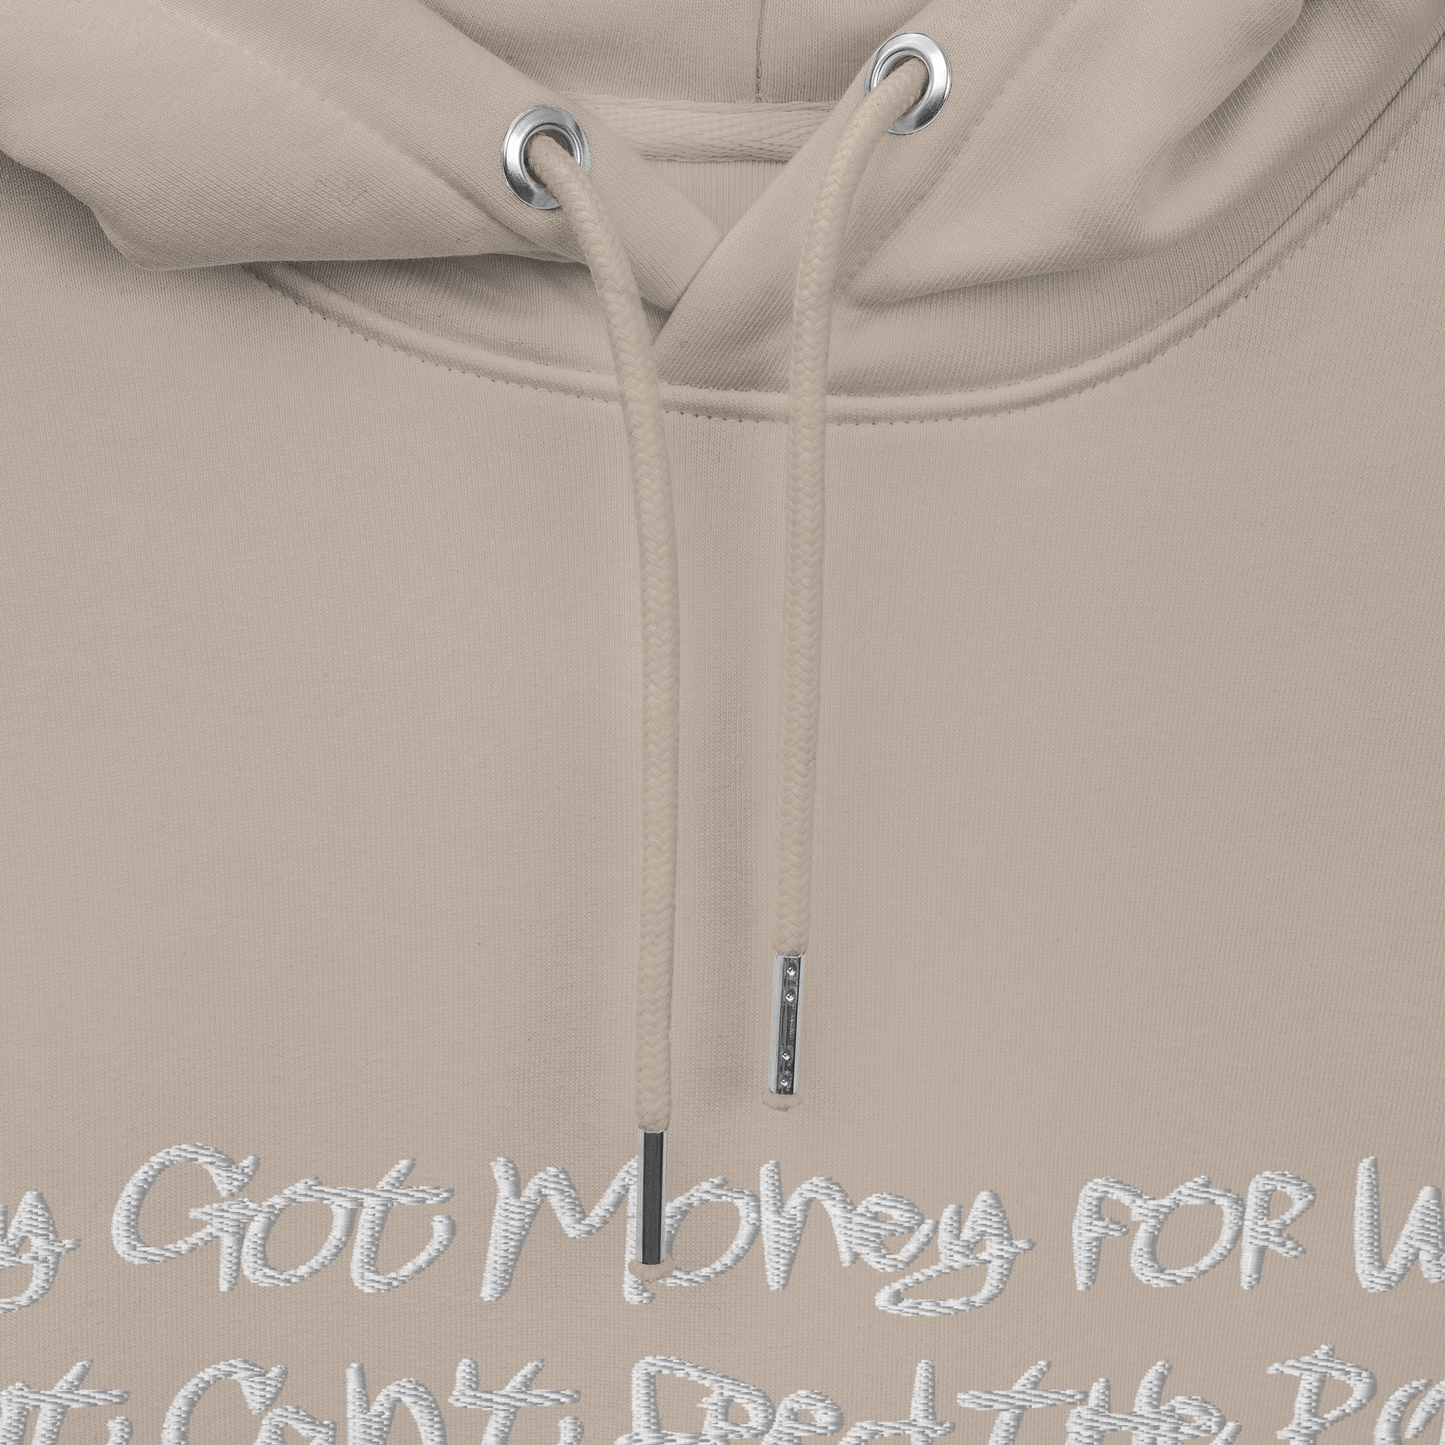 They Got Money for Wars... Embroidered Hoodie